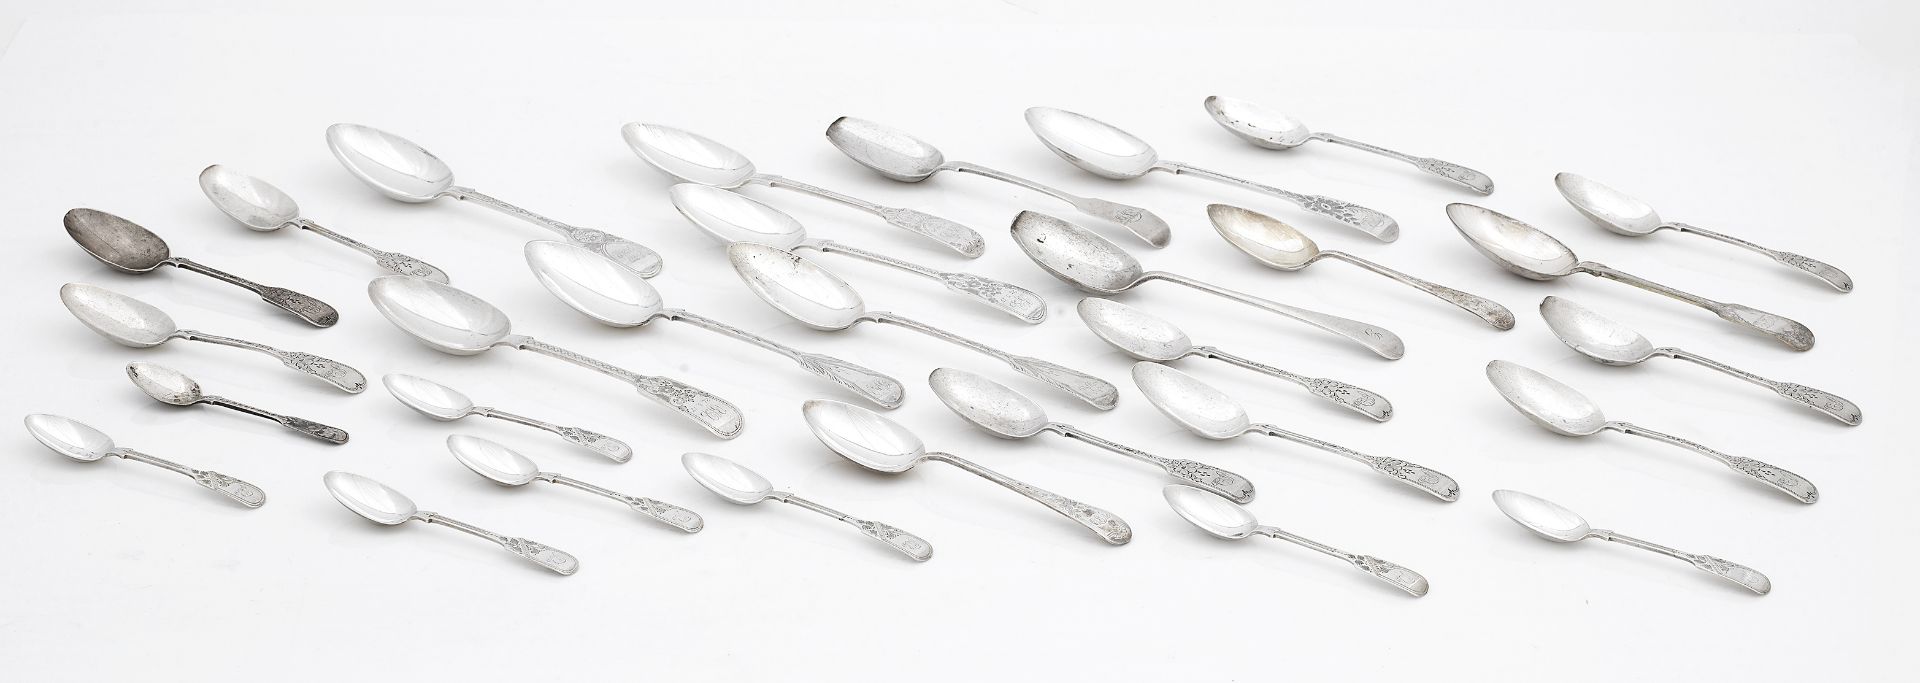 A collection of fiddle pattern cutlery various makers and dates